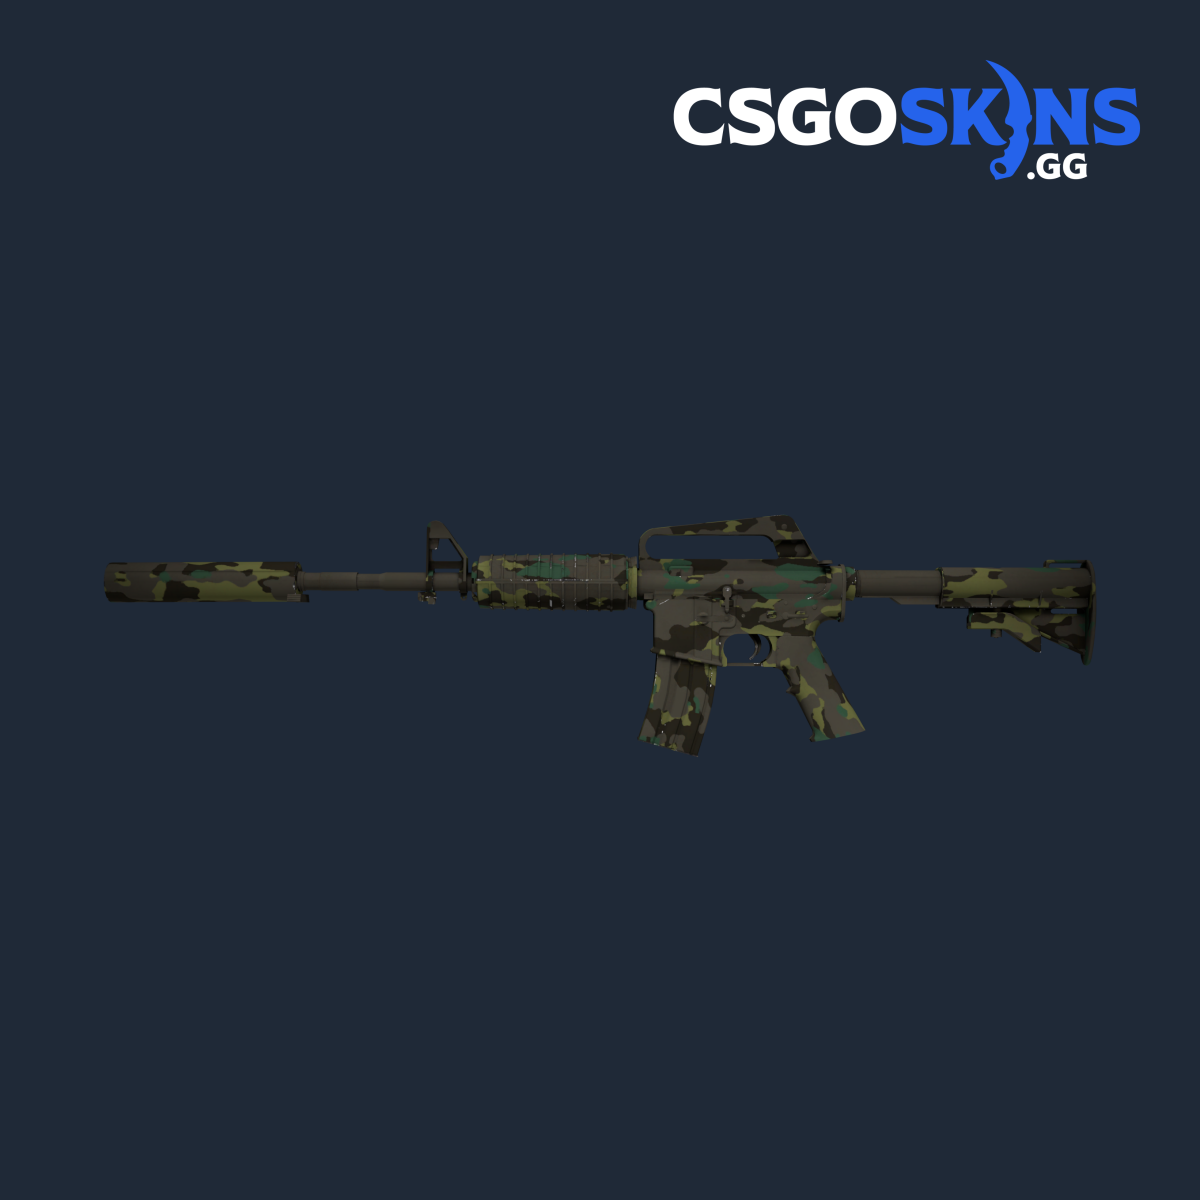 instal the last version for ipod M4A1-S Boreal Forest cs go skin